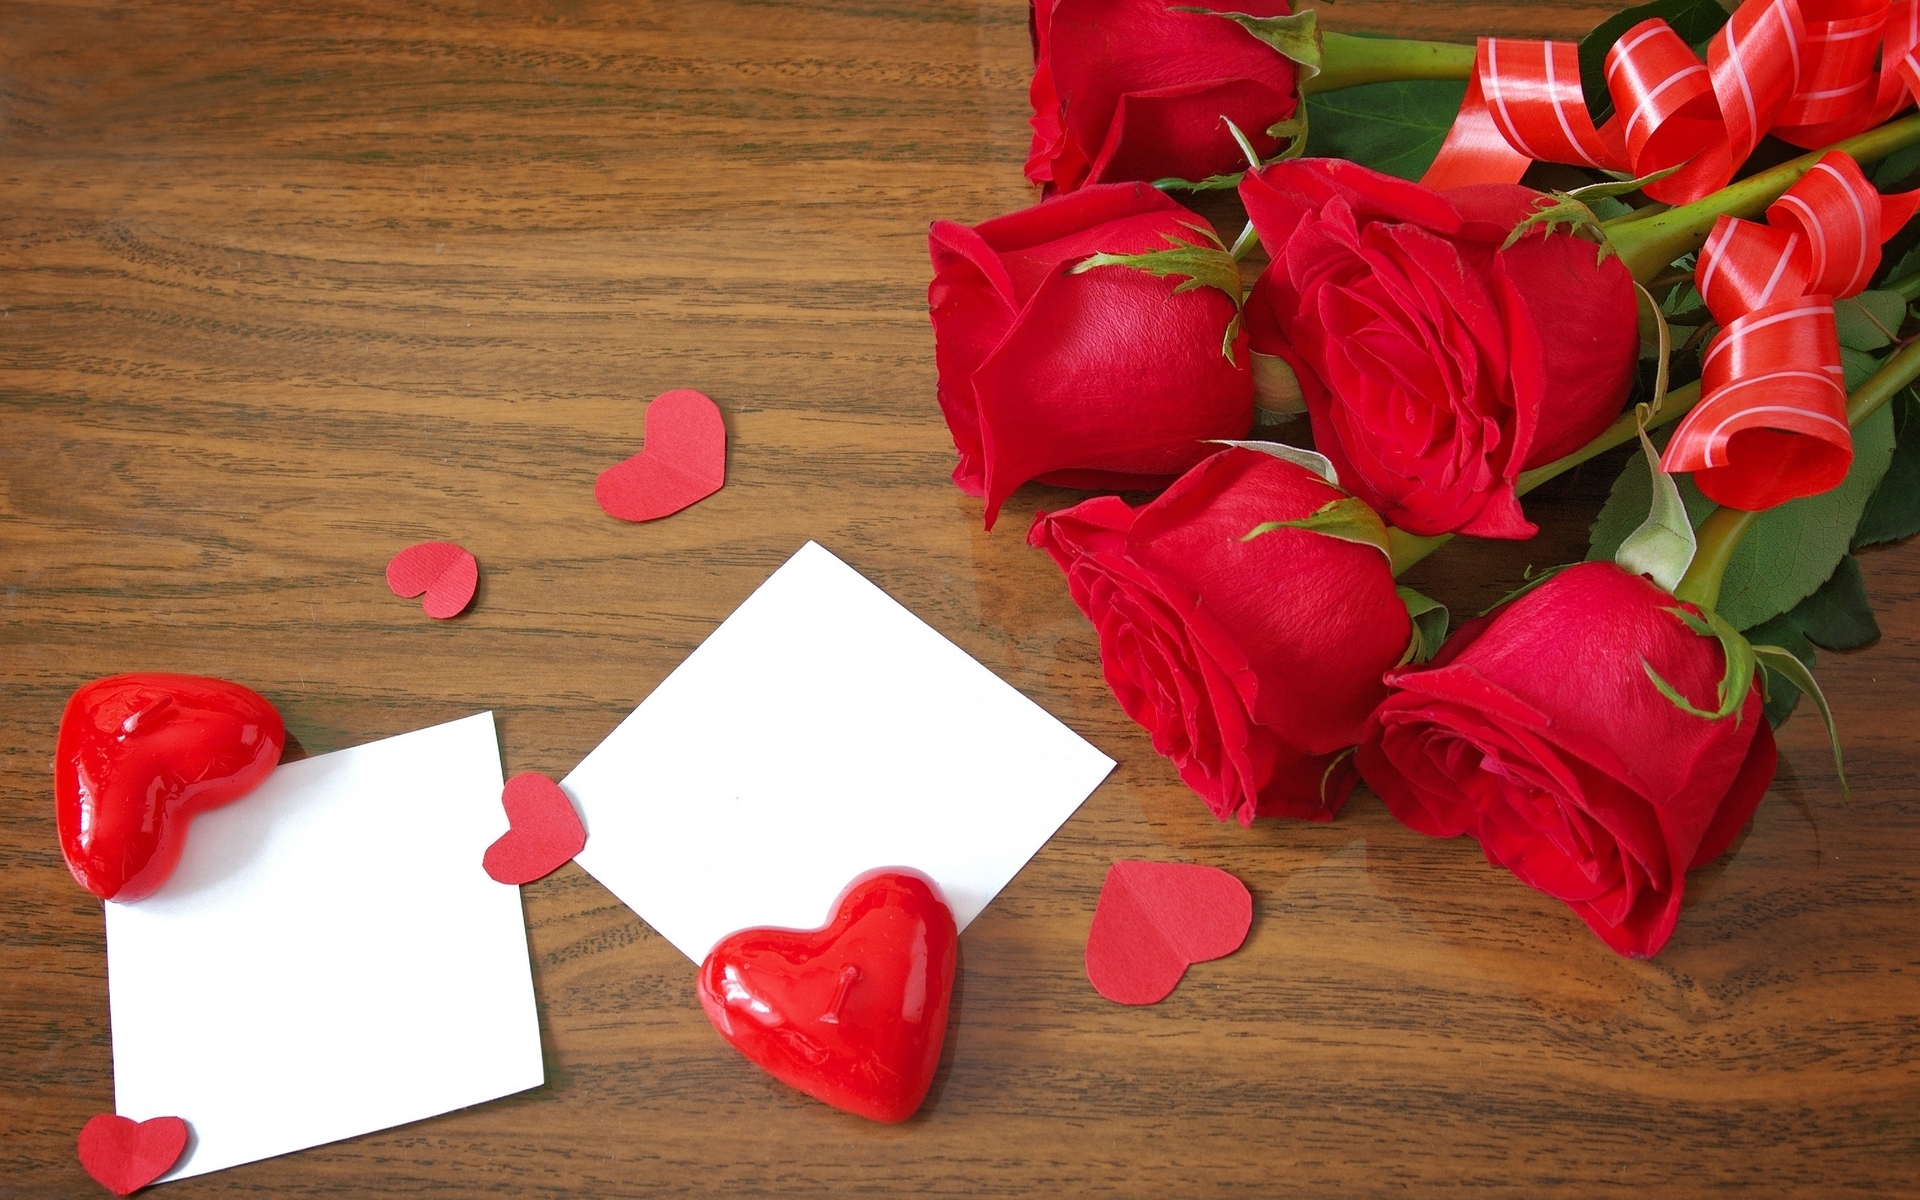 Image: Roses, red, flowers, bouquet, hearts, holiday, love, Valentine's Day, 14 February